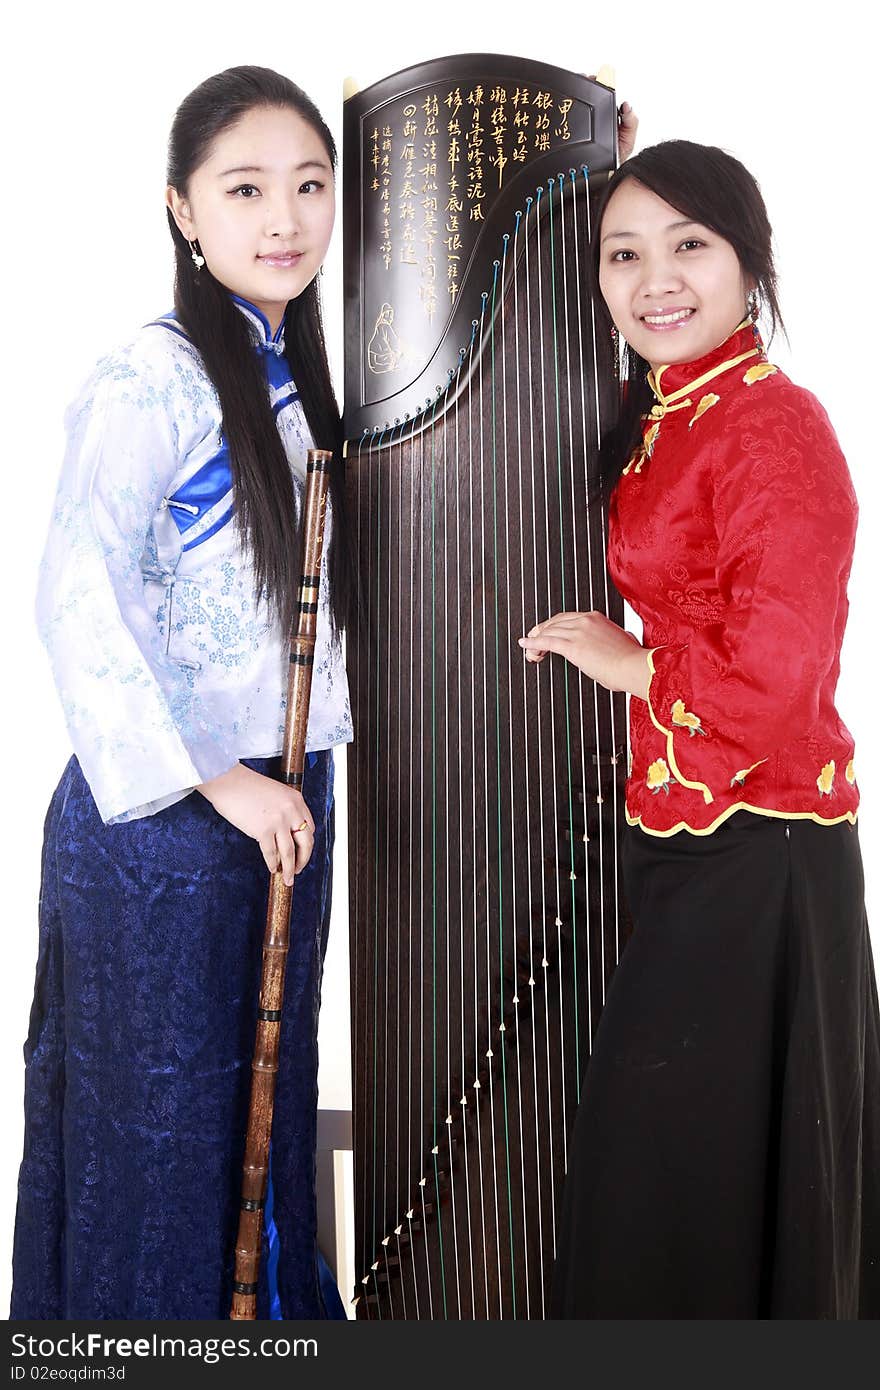 Two Chinese musicians with bamboo flute and zither on white. Chinese characters on the flute means wonderful voice,it is taken from one of China's ancient poetry. Chinese character on zither is Chinese Tang poetry,also a famous Tang Dynasty poet's calligraphy. It praised the unique charm of the zither. Two Chinese musicians with bamboo flute and zither on white. Chinese characters on the flute means wonderful voice,it is taken from one of China's ancient poetry. Chinese character on zither is Chinese Tang poetry,also a famous Tang Dynasty poet's calligraphy. It praised the unique charm of the zither.